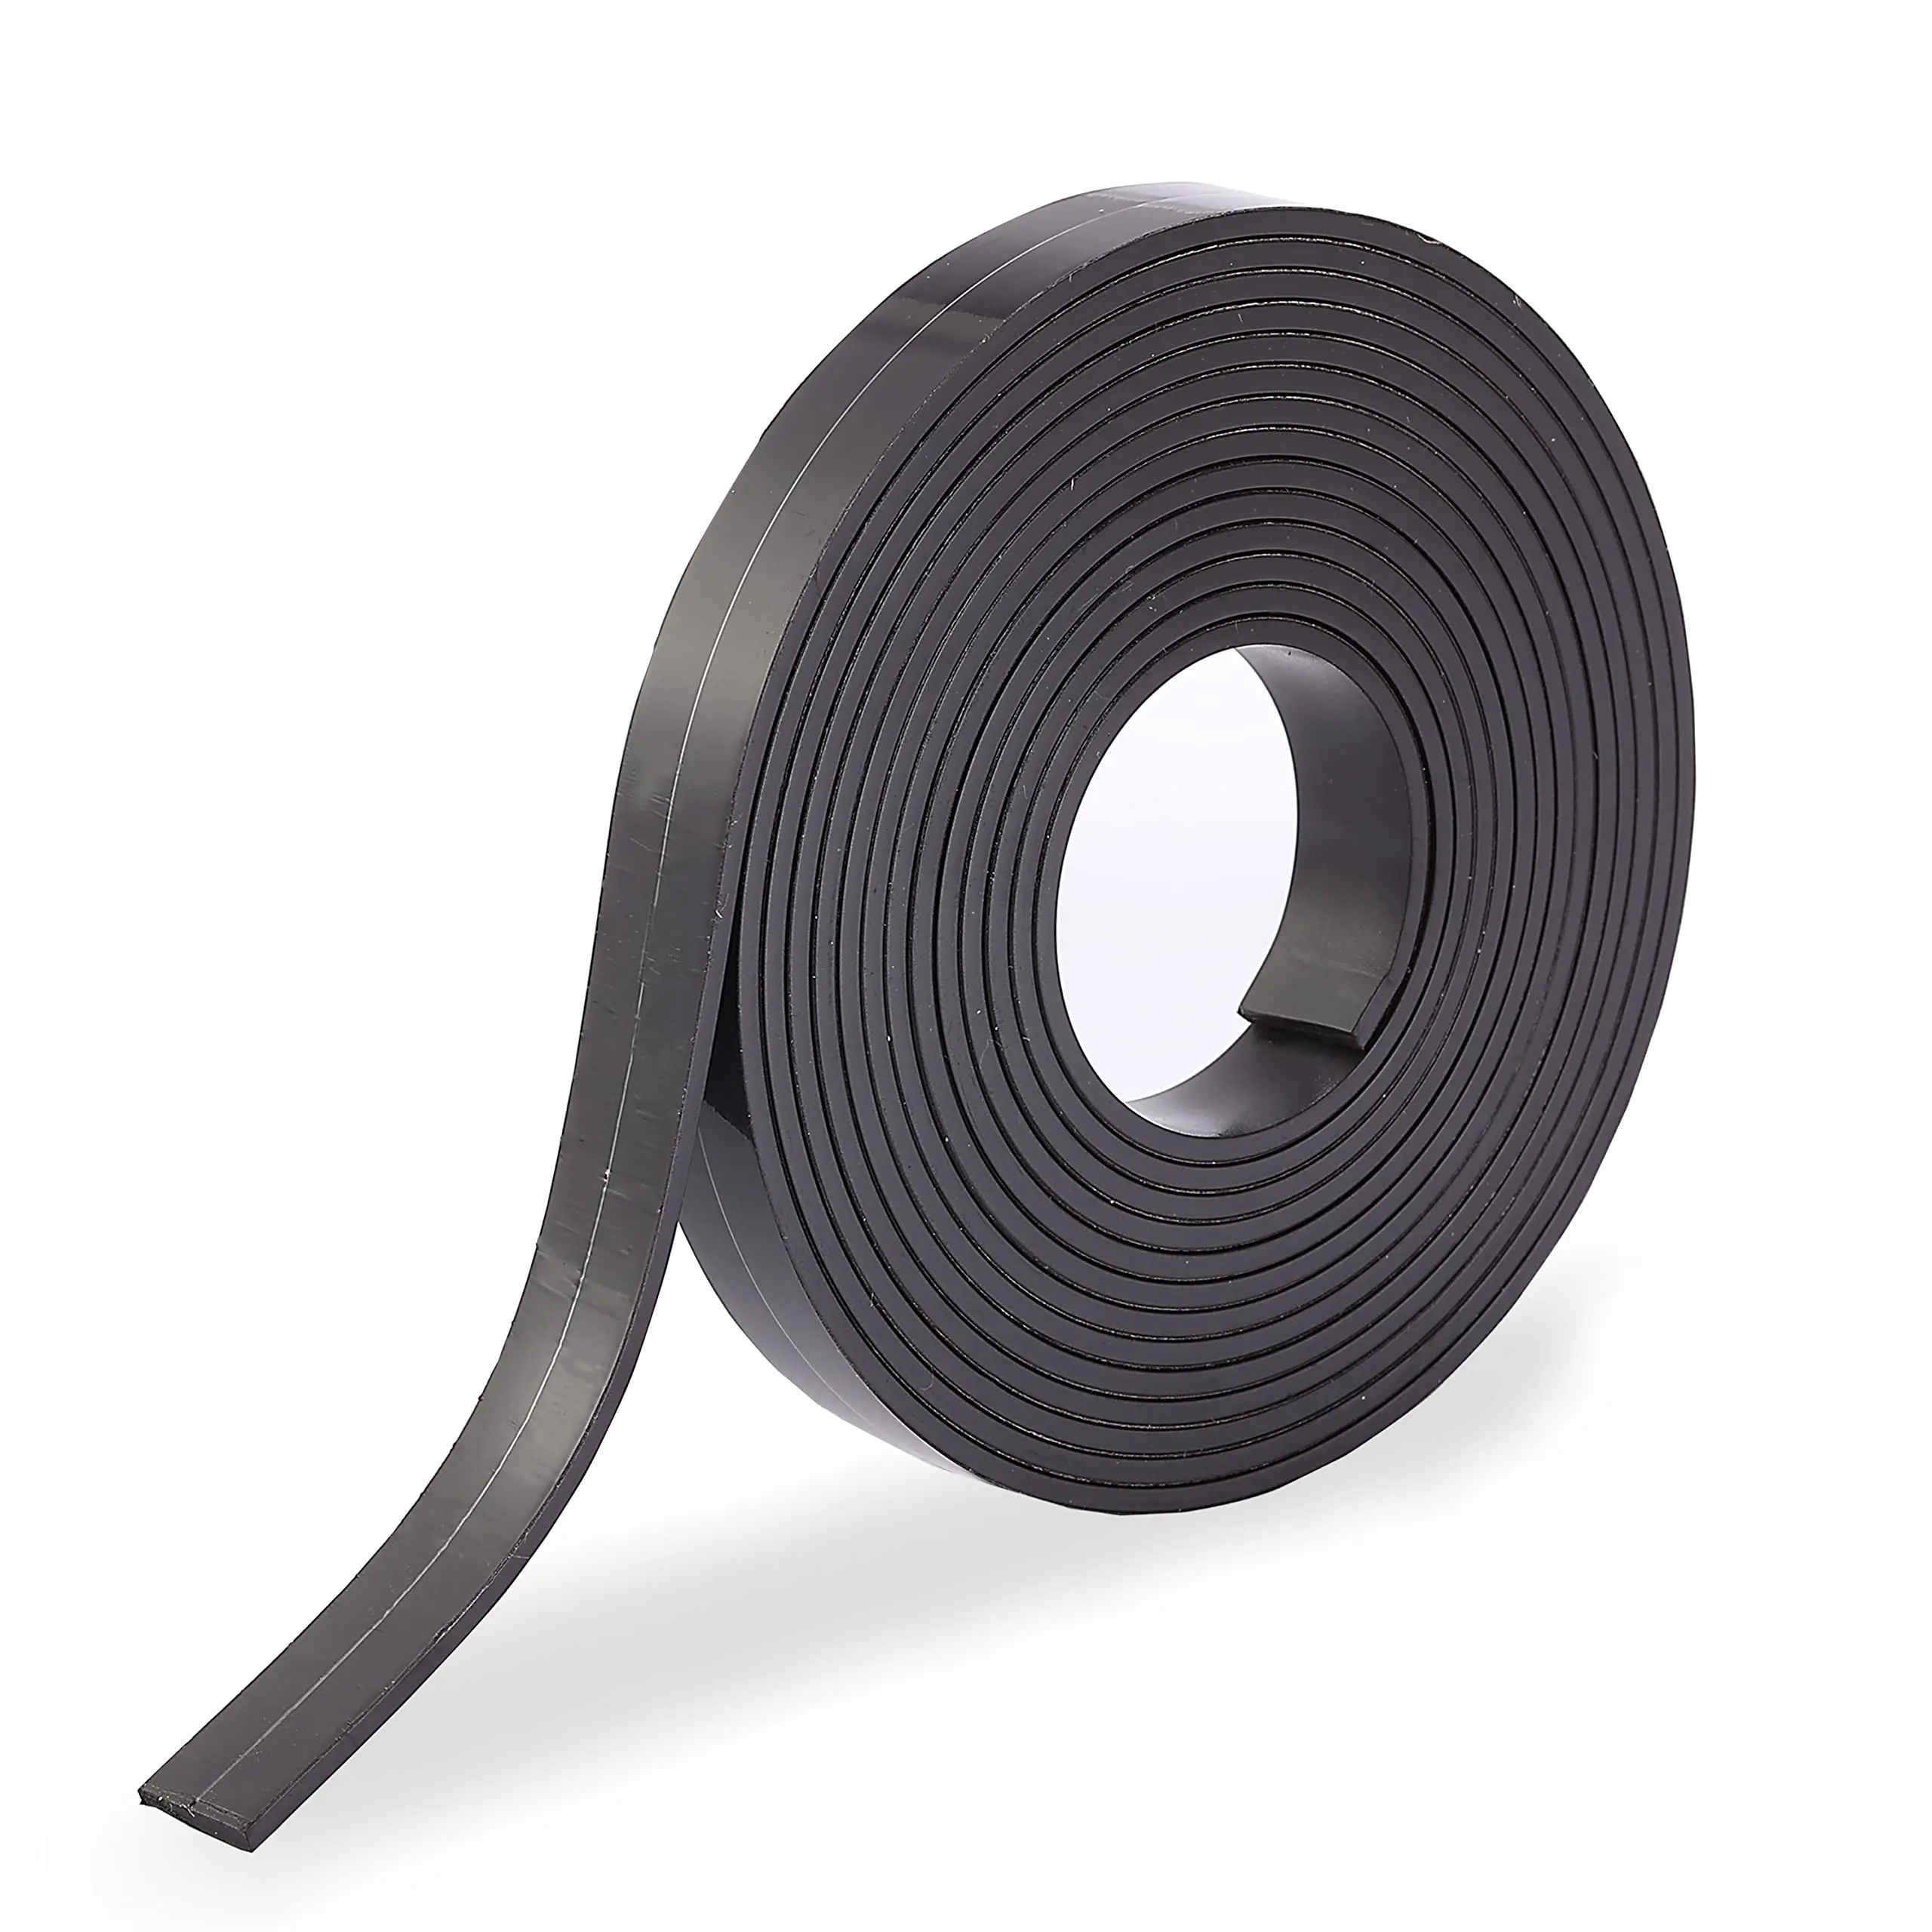 Magnetic Tape Magnetic Strip 2Meters Rubber Magnet 10*1.5mm Self Adhesive Flexible Magnetic Strip Rubber Magnet Tape width 10mm